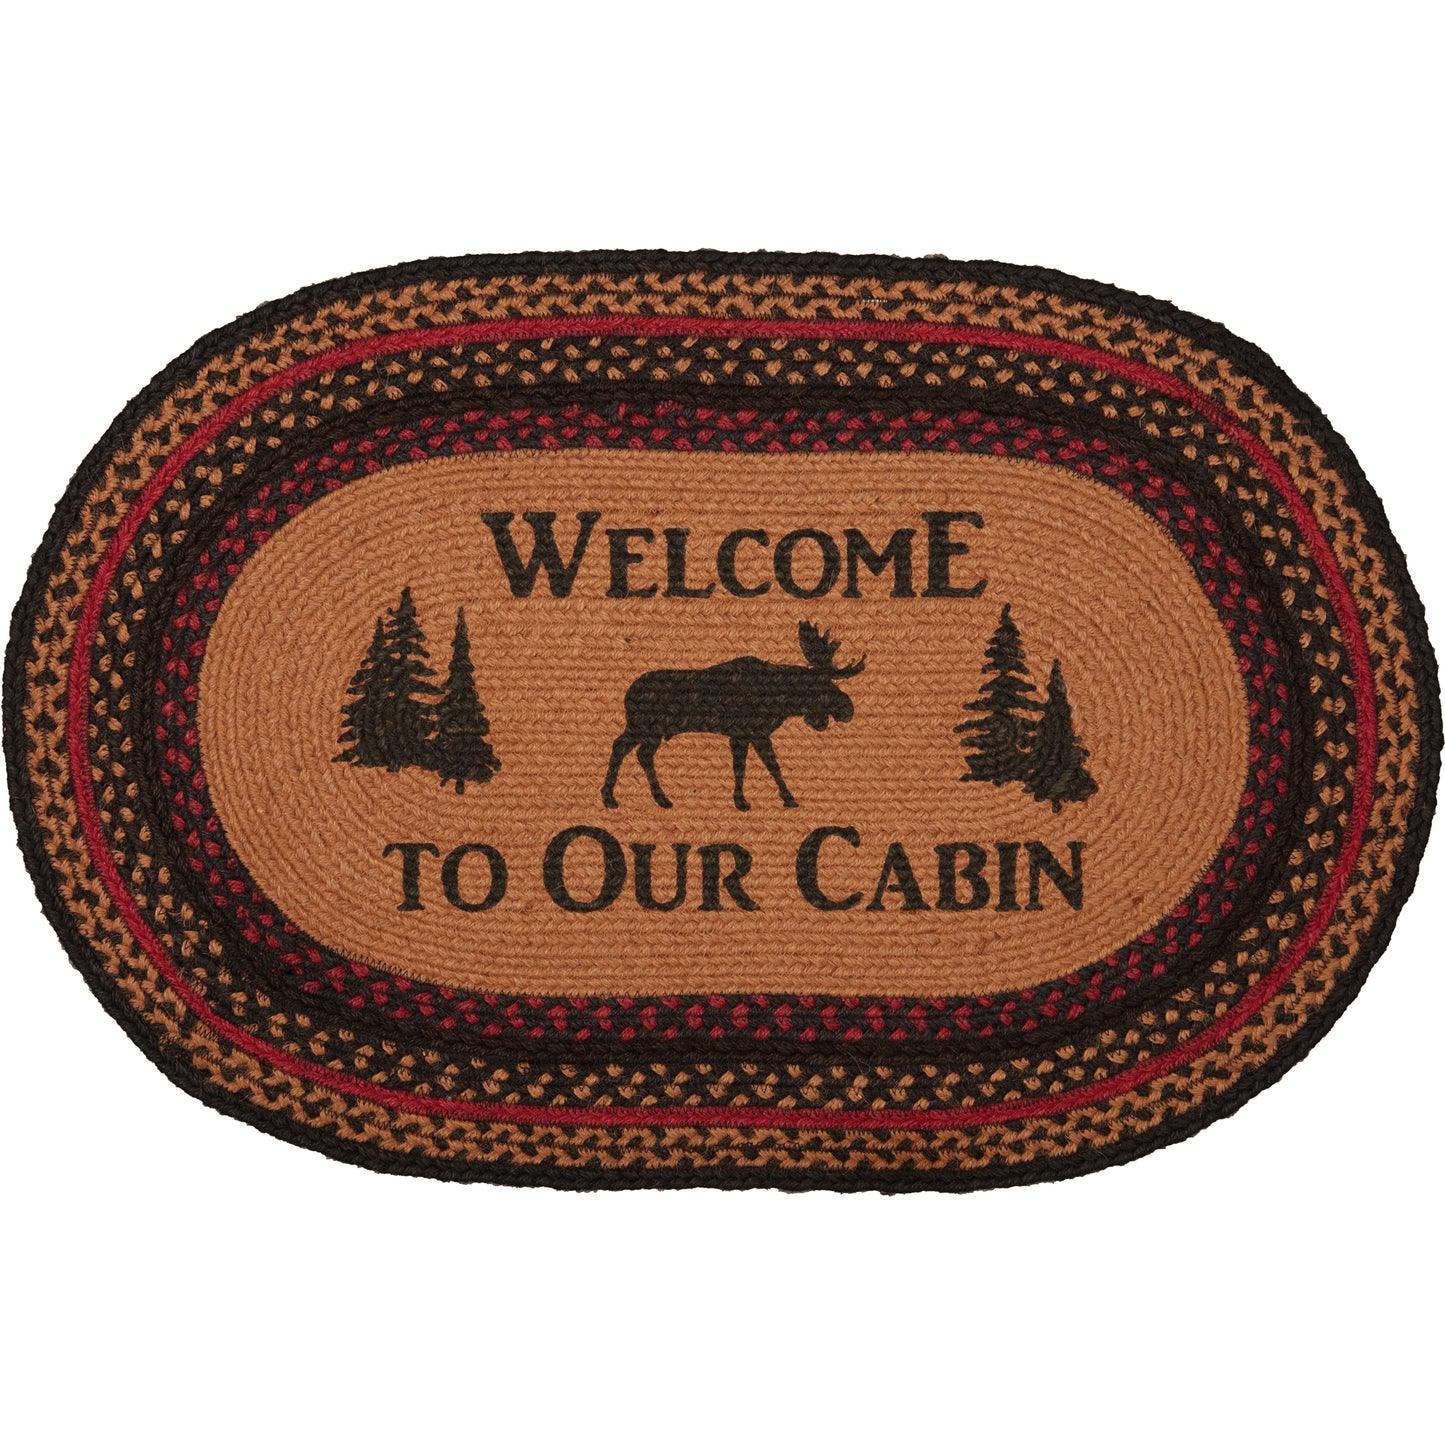 69484-Cumberland-Stenciled-Moose-Jute-Rug-Oval-Welcome-to-the-Cabin-w-Pad-20x30-image-4